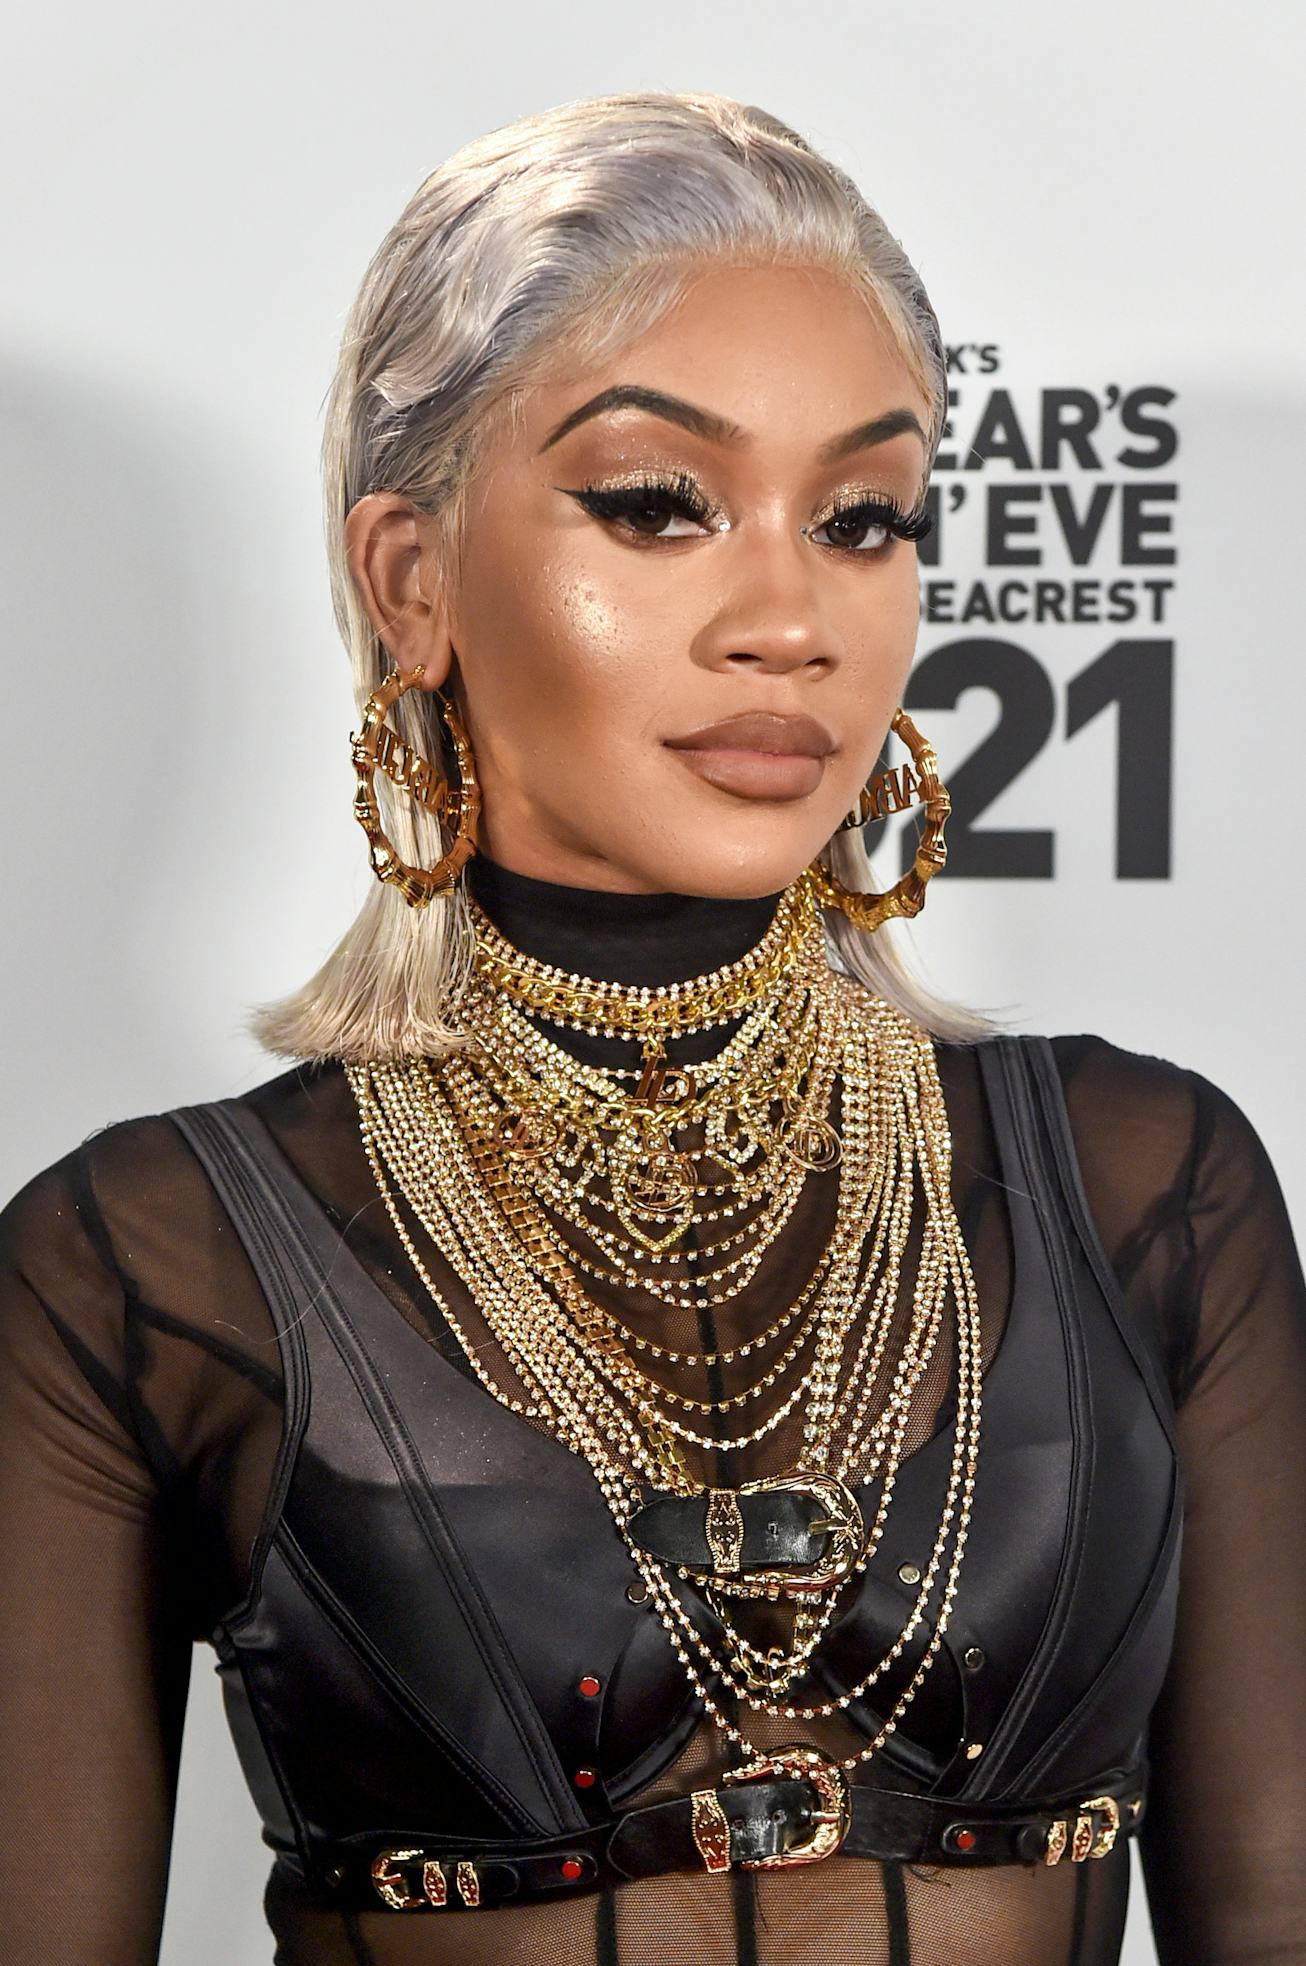 LOS ANGELES, CA – DECEMBER 31st: In this image released on December 31, Saweetie arrives at Dick Cla...